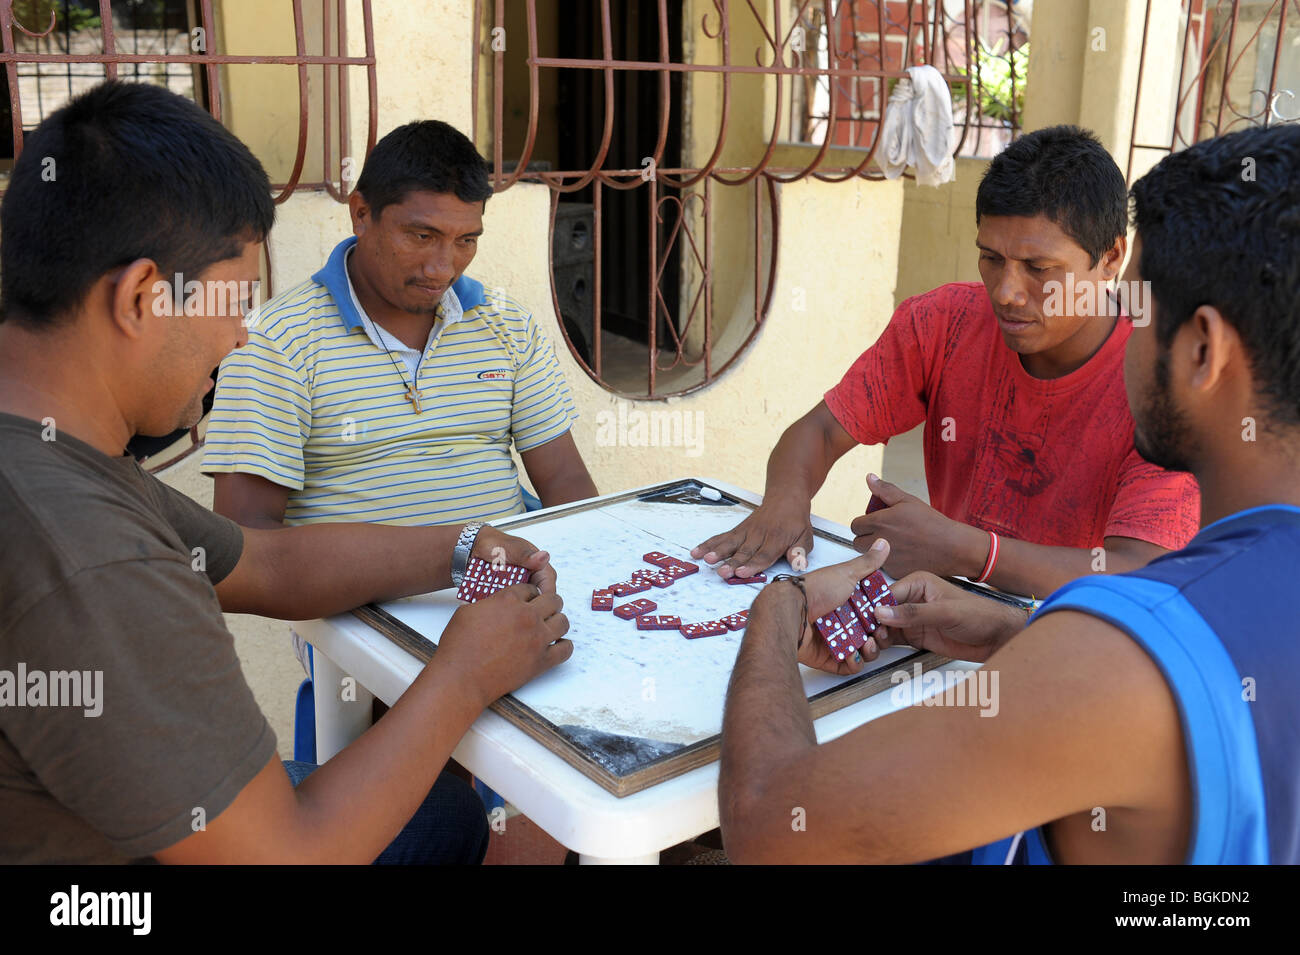 Locals playing dominoes outside in Taganga, a small fishing village on the outskirts of Tayrone National Park, Colombia Stock Photo